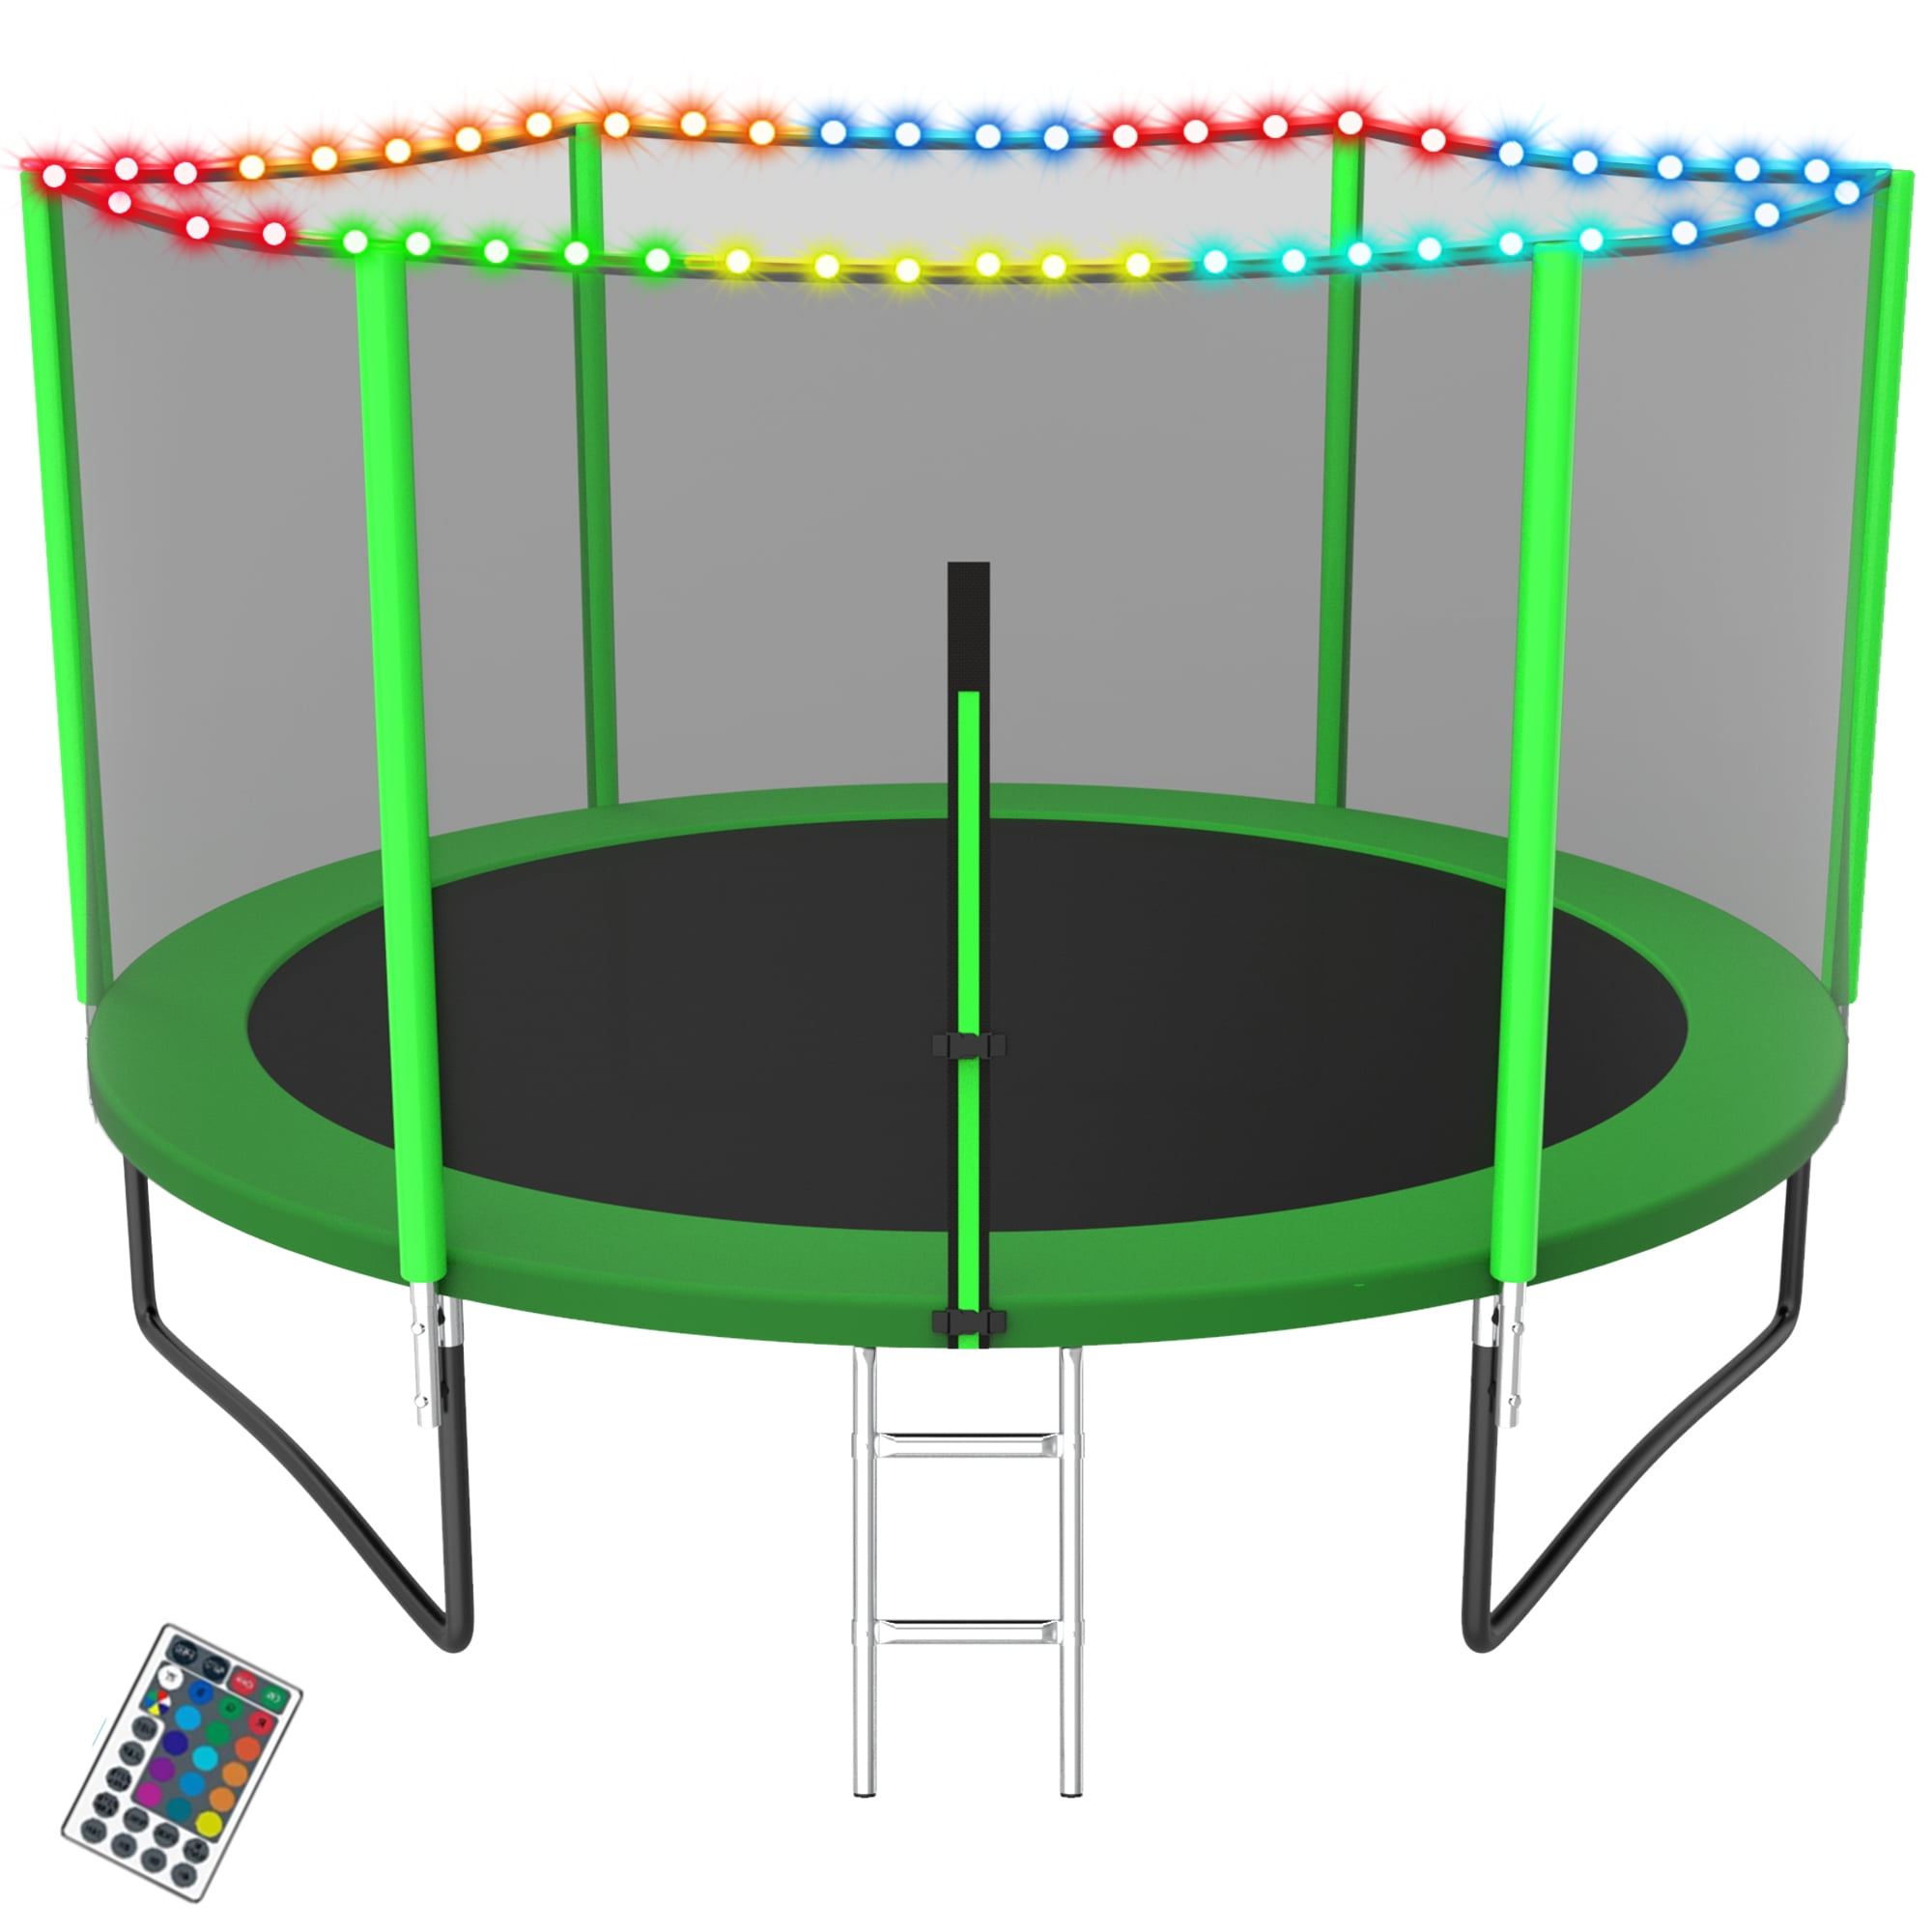 YORIN Trampoline for 3-4 Kids, 10 FT Trampoline for Adults with Enclosure Net, Ladder, 1000LBS Weight Capacity Outdoor Round Recreational Trampoline, ASTM Approved Heavy Duty Trampoline